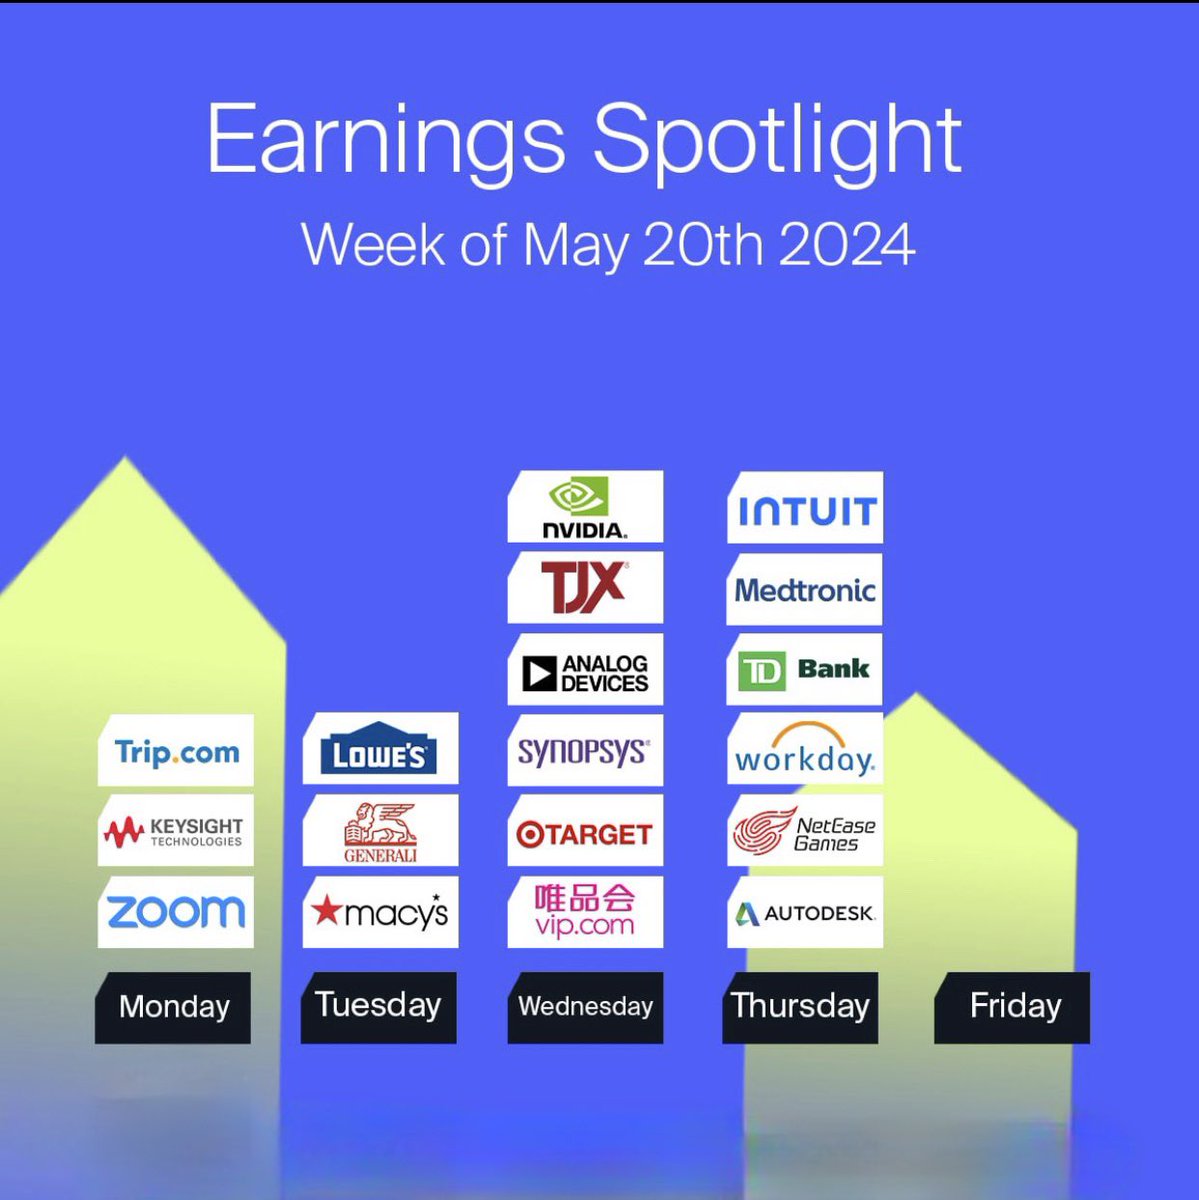 Mon 20 May 2024, 🗓️Get ready for an exciting week of earnings reports! Major companies are set to announce their performance next week, such as #NVIDIA $NVDA, which will report earnings this Wed. #EarningsReports #EarningsSeason #MarketWatch